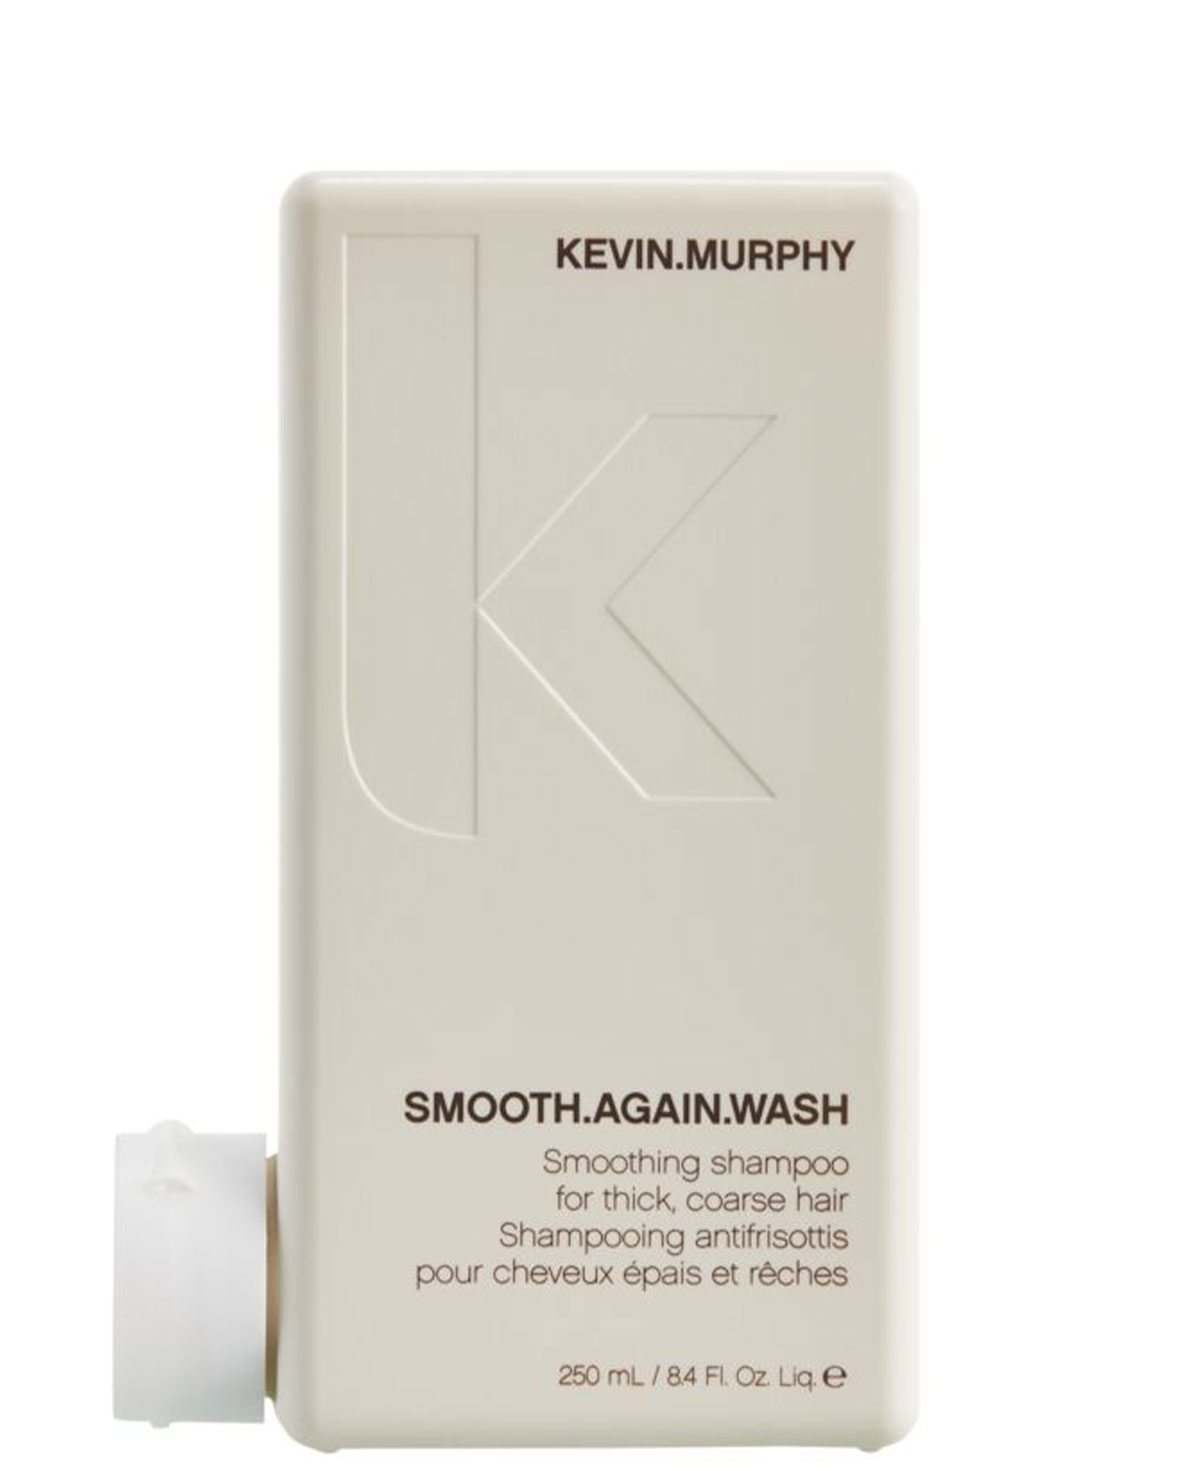 Kevin.Murphy SMOOTH.AGAIN.WASH 250ml